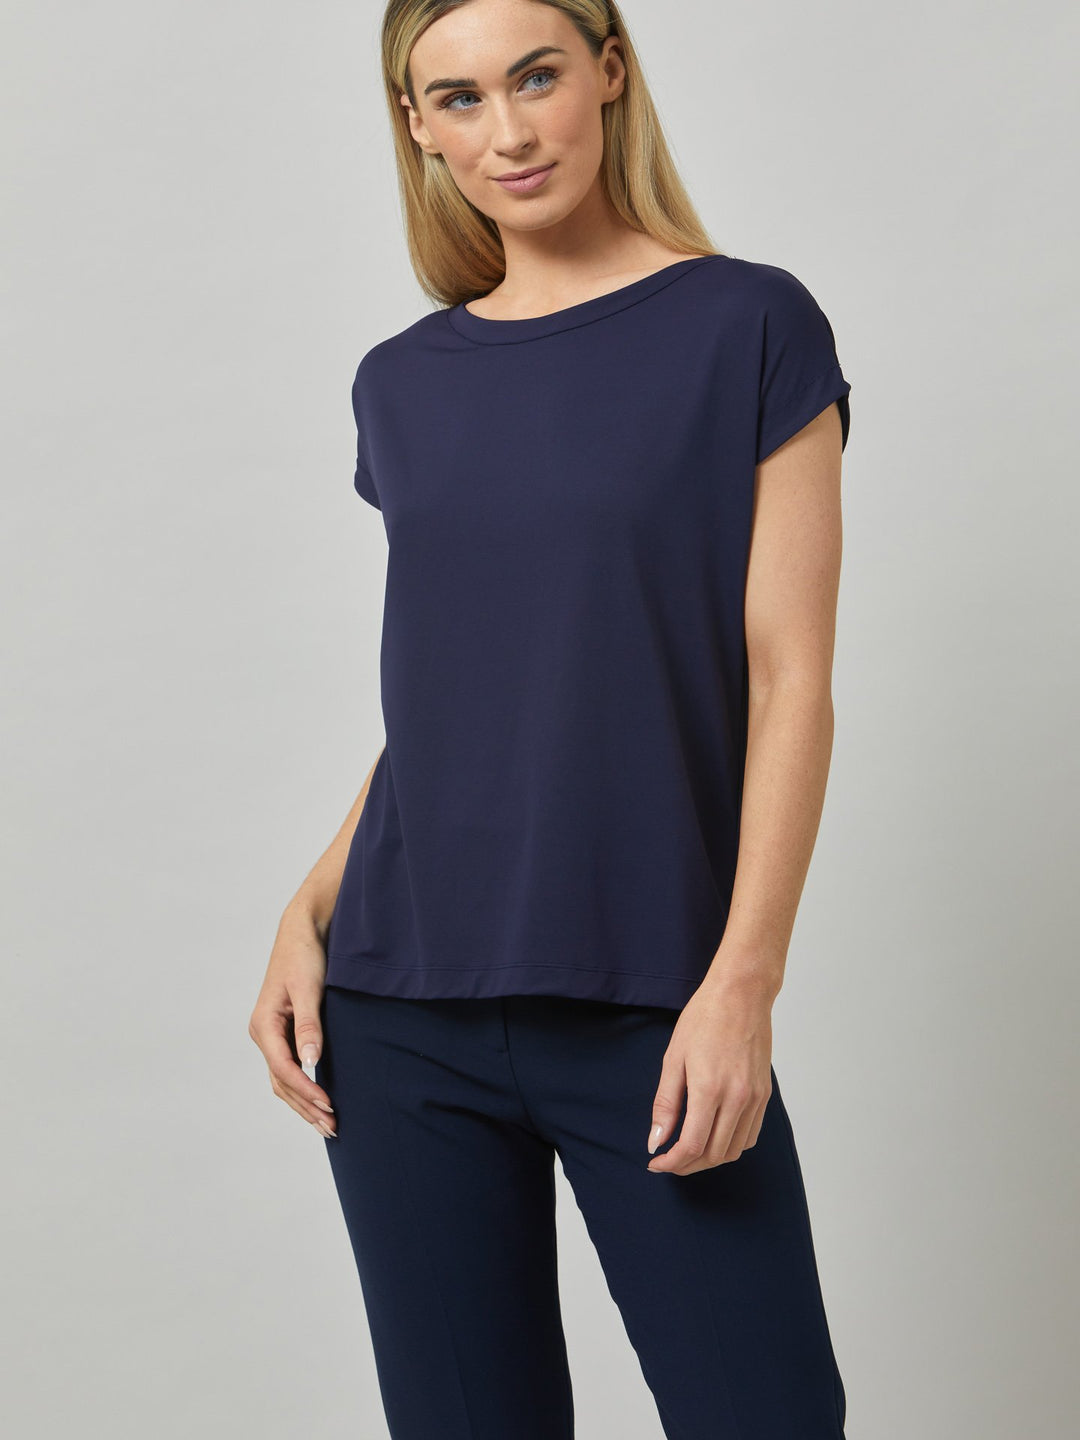 Gina, a fluid T-shirt with a clean crew neck, made to be worn oversized for slouchy ease. Fabricated in fine knit, this style features our elevated neutrals collection. Styled with the elegant Jill Pant.